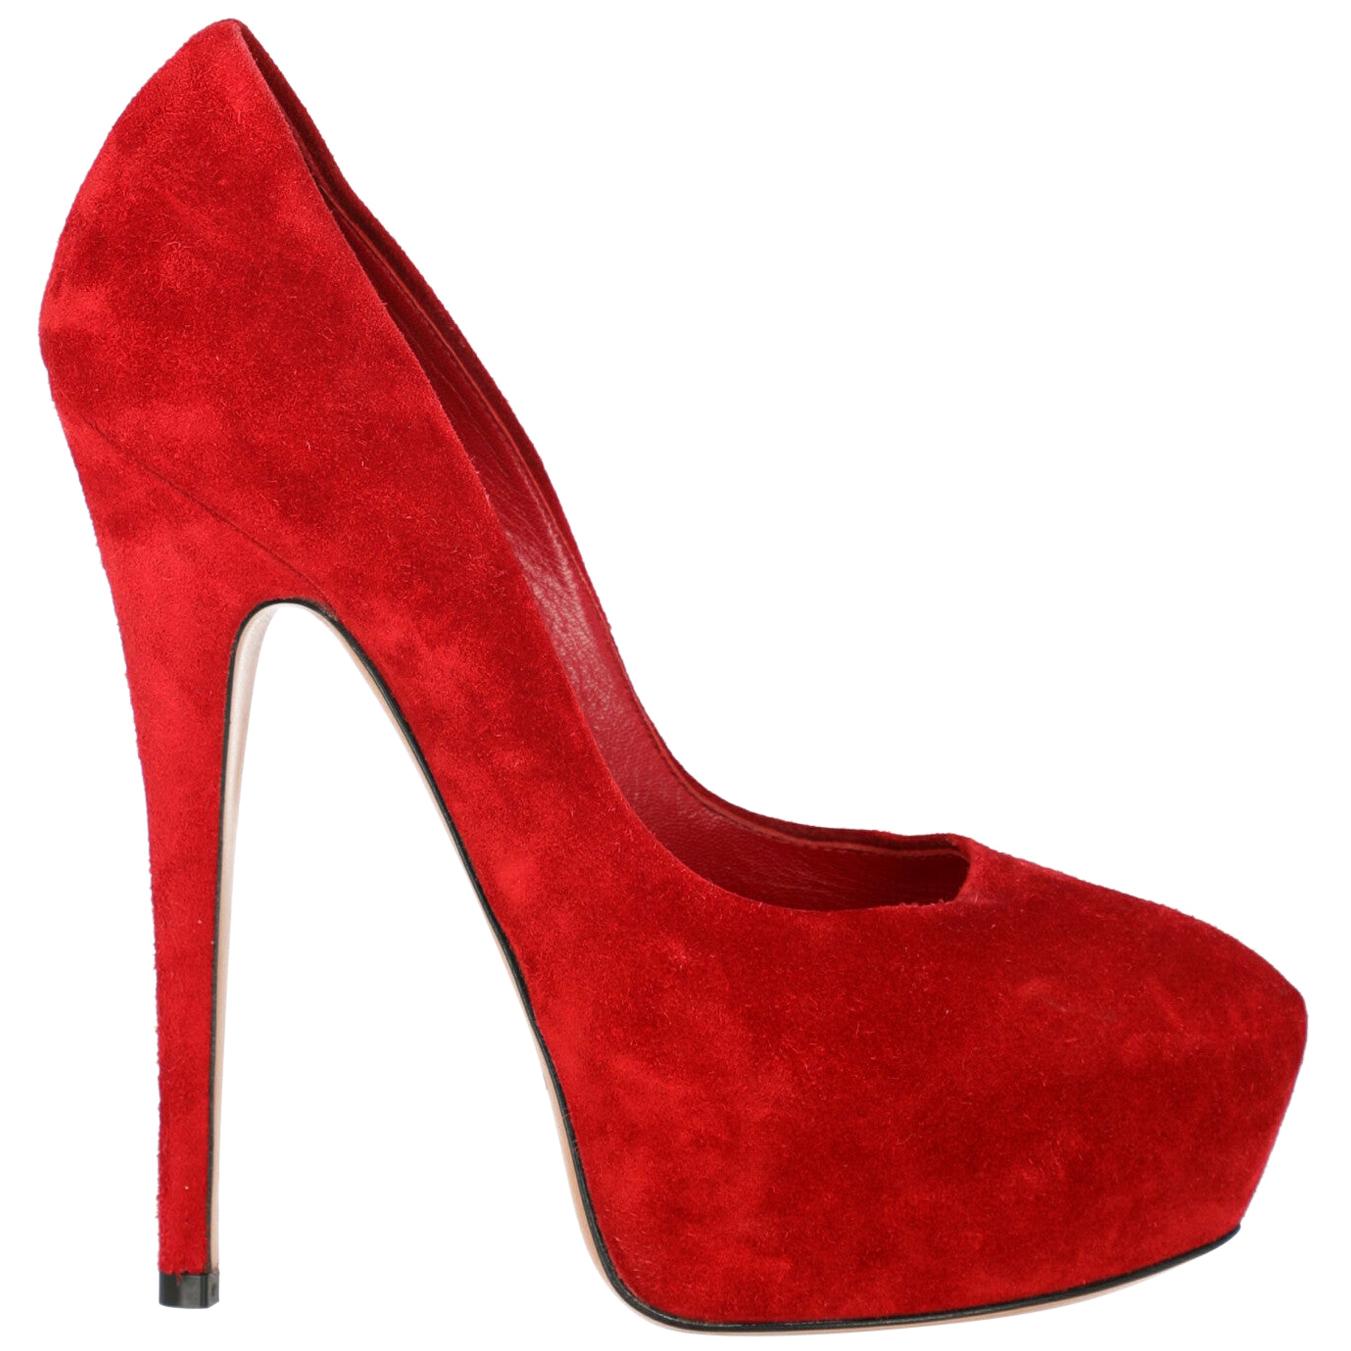 Casadei Woman Pumps Red Leather US 6 For Sale